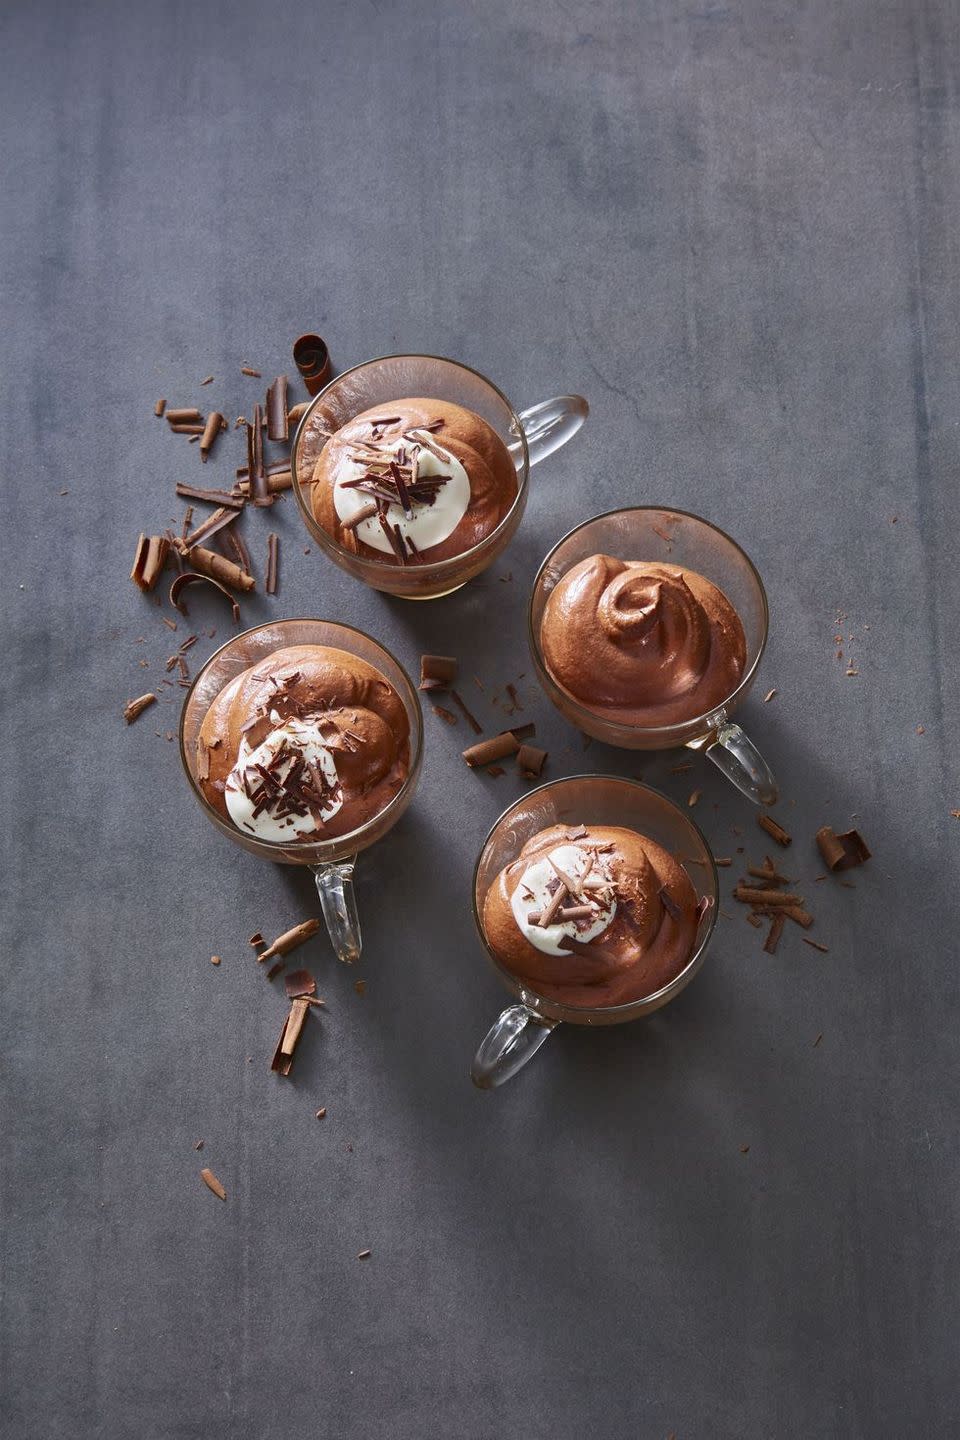 chocolate mousse with chocolate shavings in a glass mug